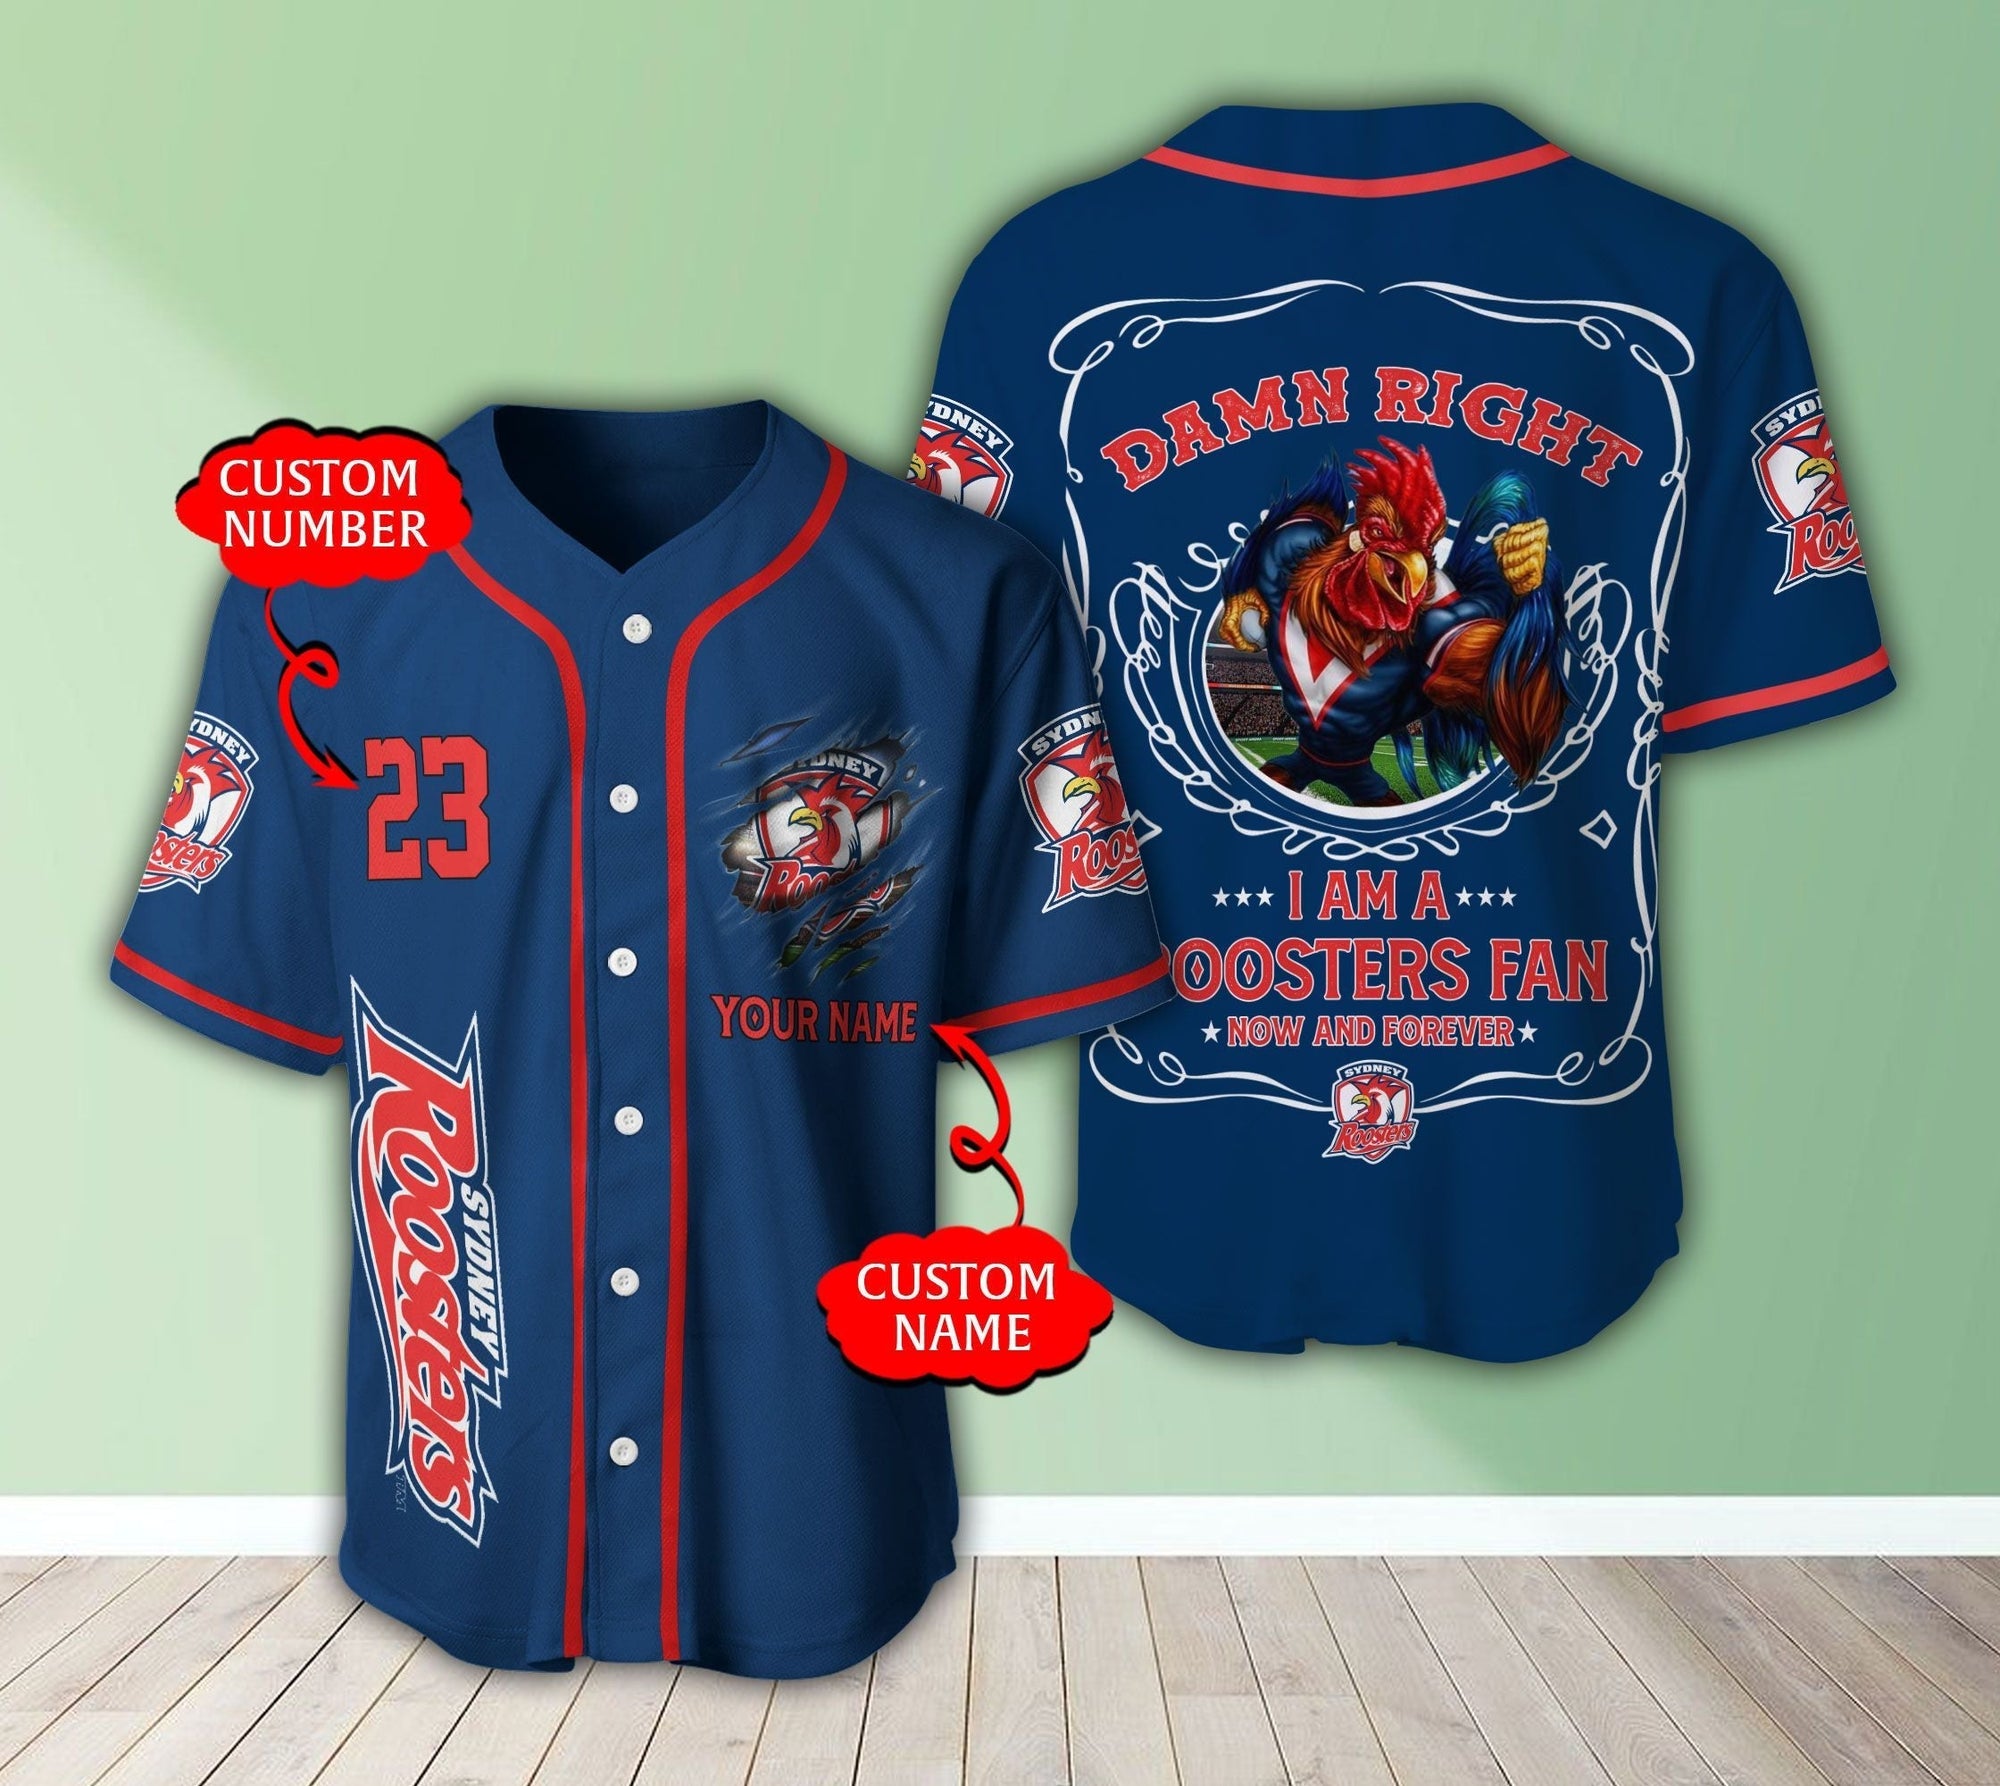 sydney-roosters-nrl-3d-personalized-baseball-jersey-damn-right-lt10